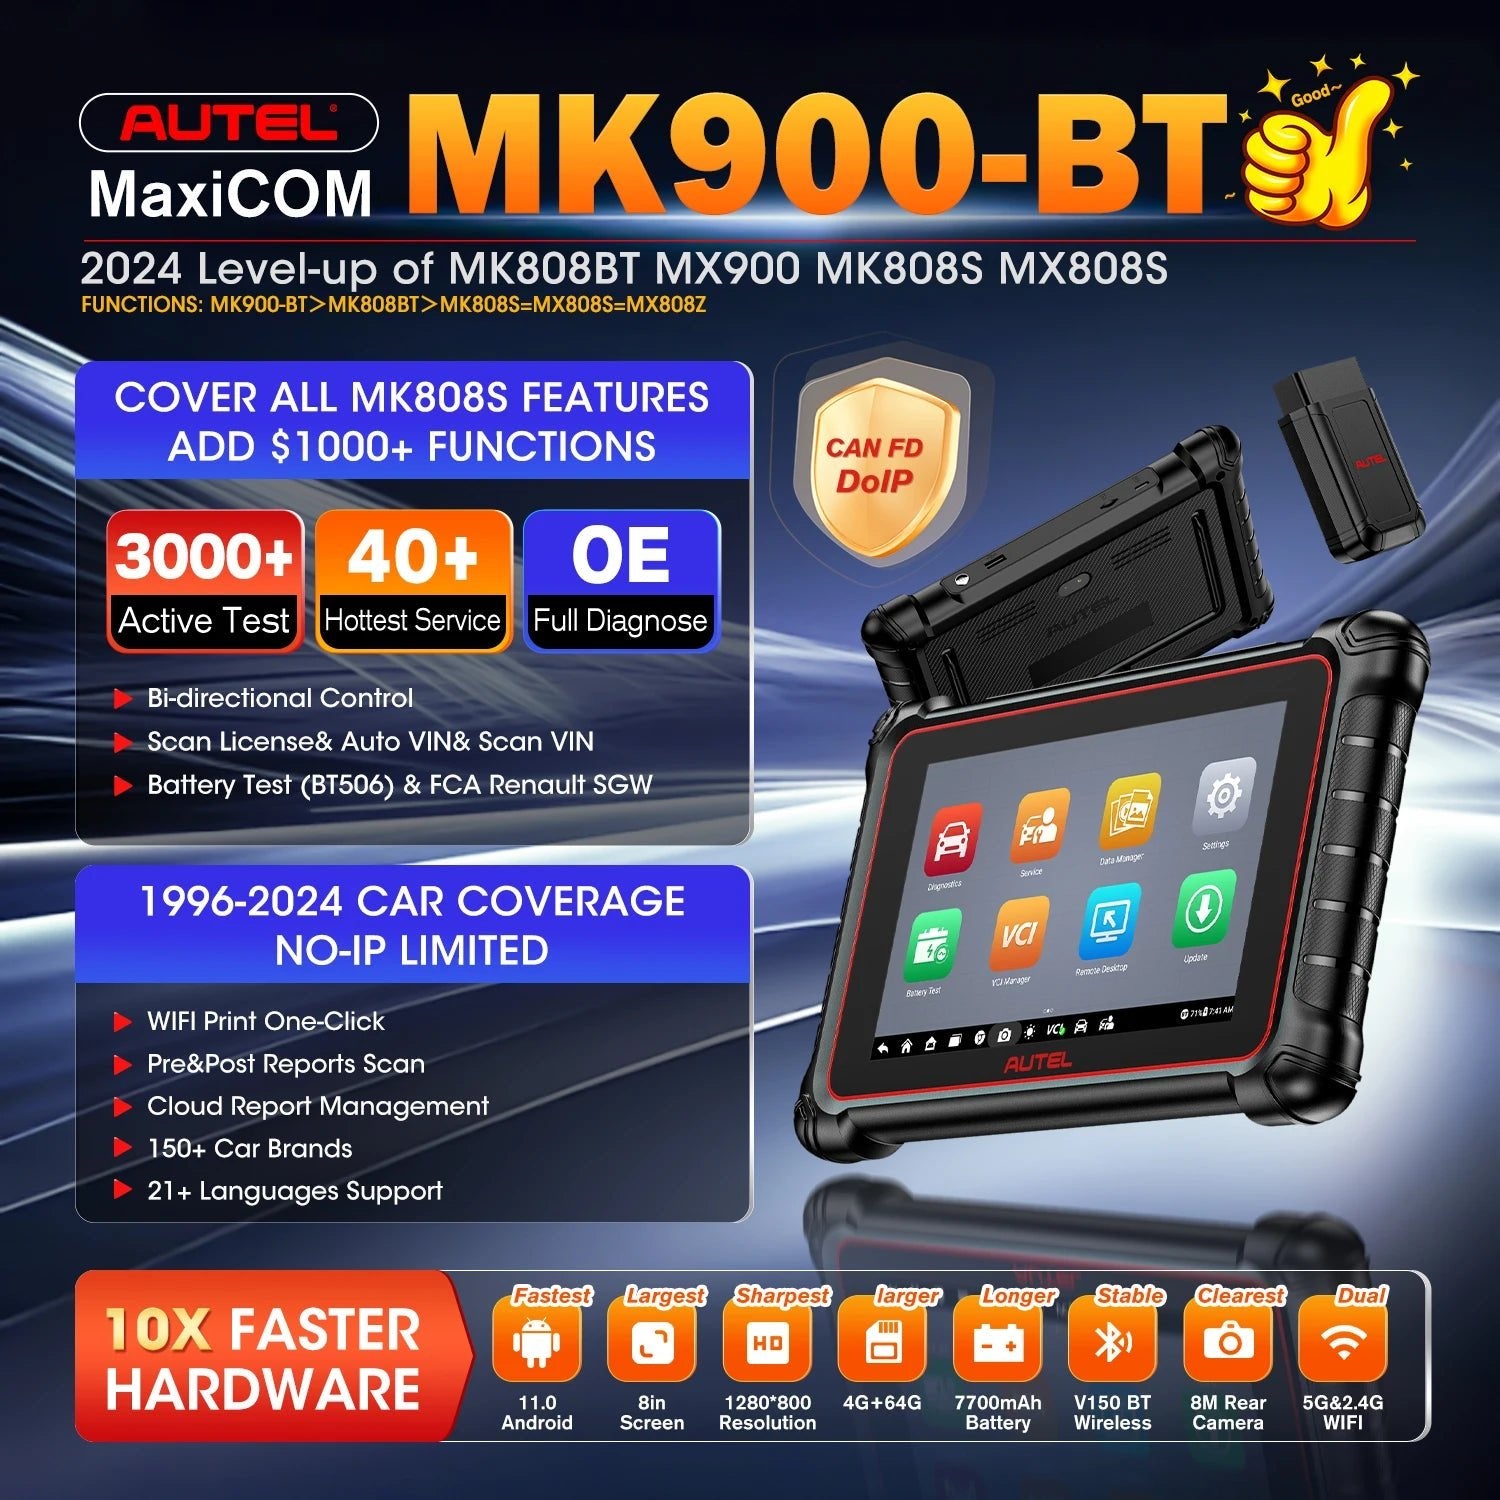 Autel MaxiCOM MK900BT Bidirectional Diagnostic Tool, Active Test, 40+ Service with CAN FD/ DOIP, Upgrade of MK808BT PRO/ MK808S - Dynamex